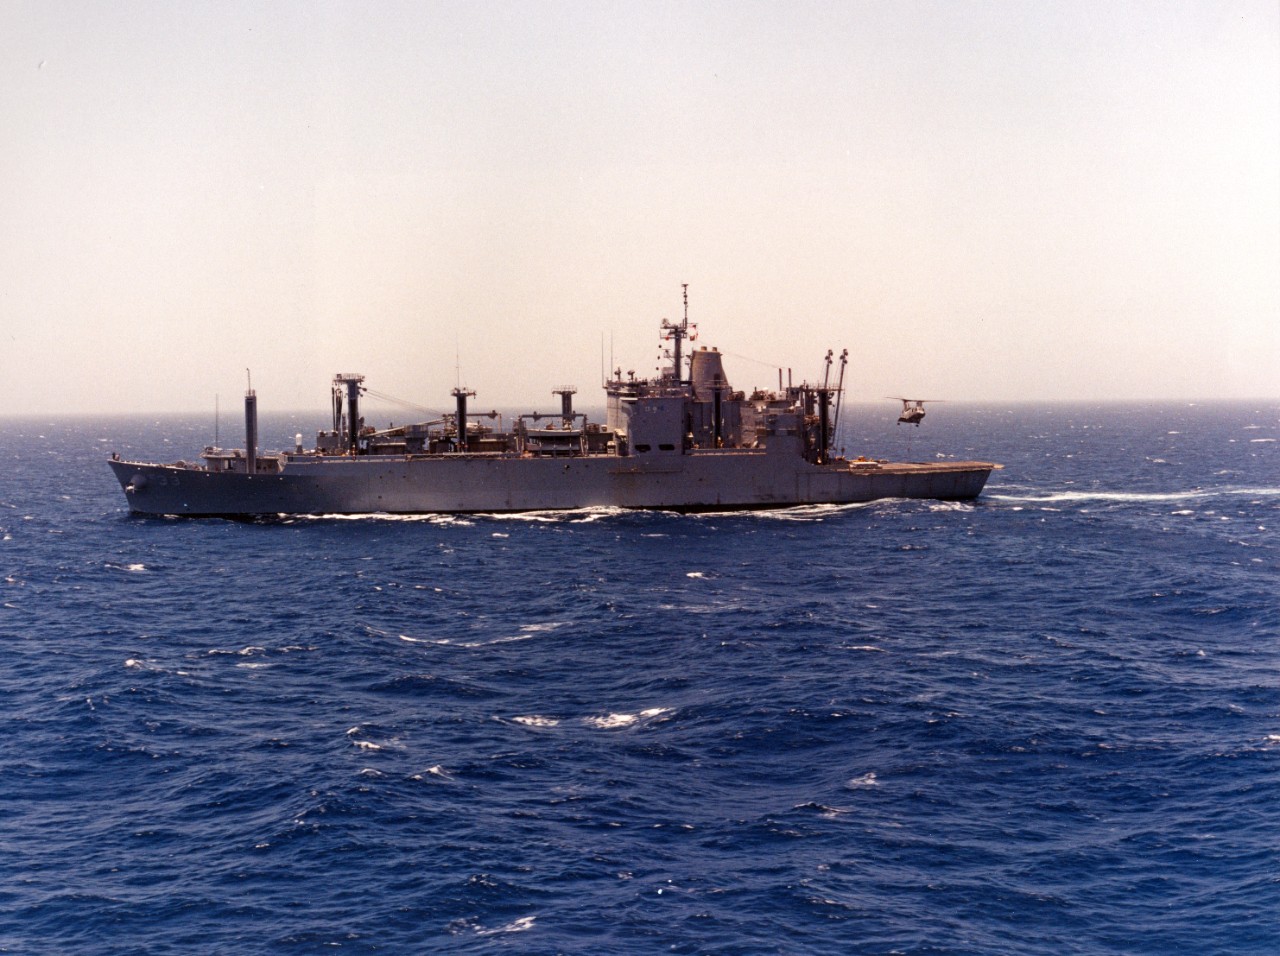 Port beam view of ammunition ship USS Shasta (AE-33) underway, circa March-July 1993. A CH-46 Sea Knight helicopter is operating over the ship's landing pad.